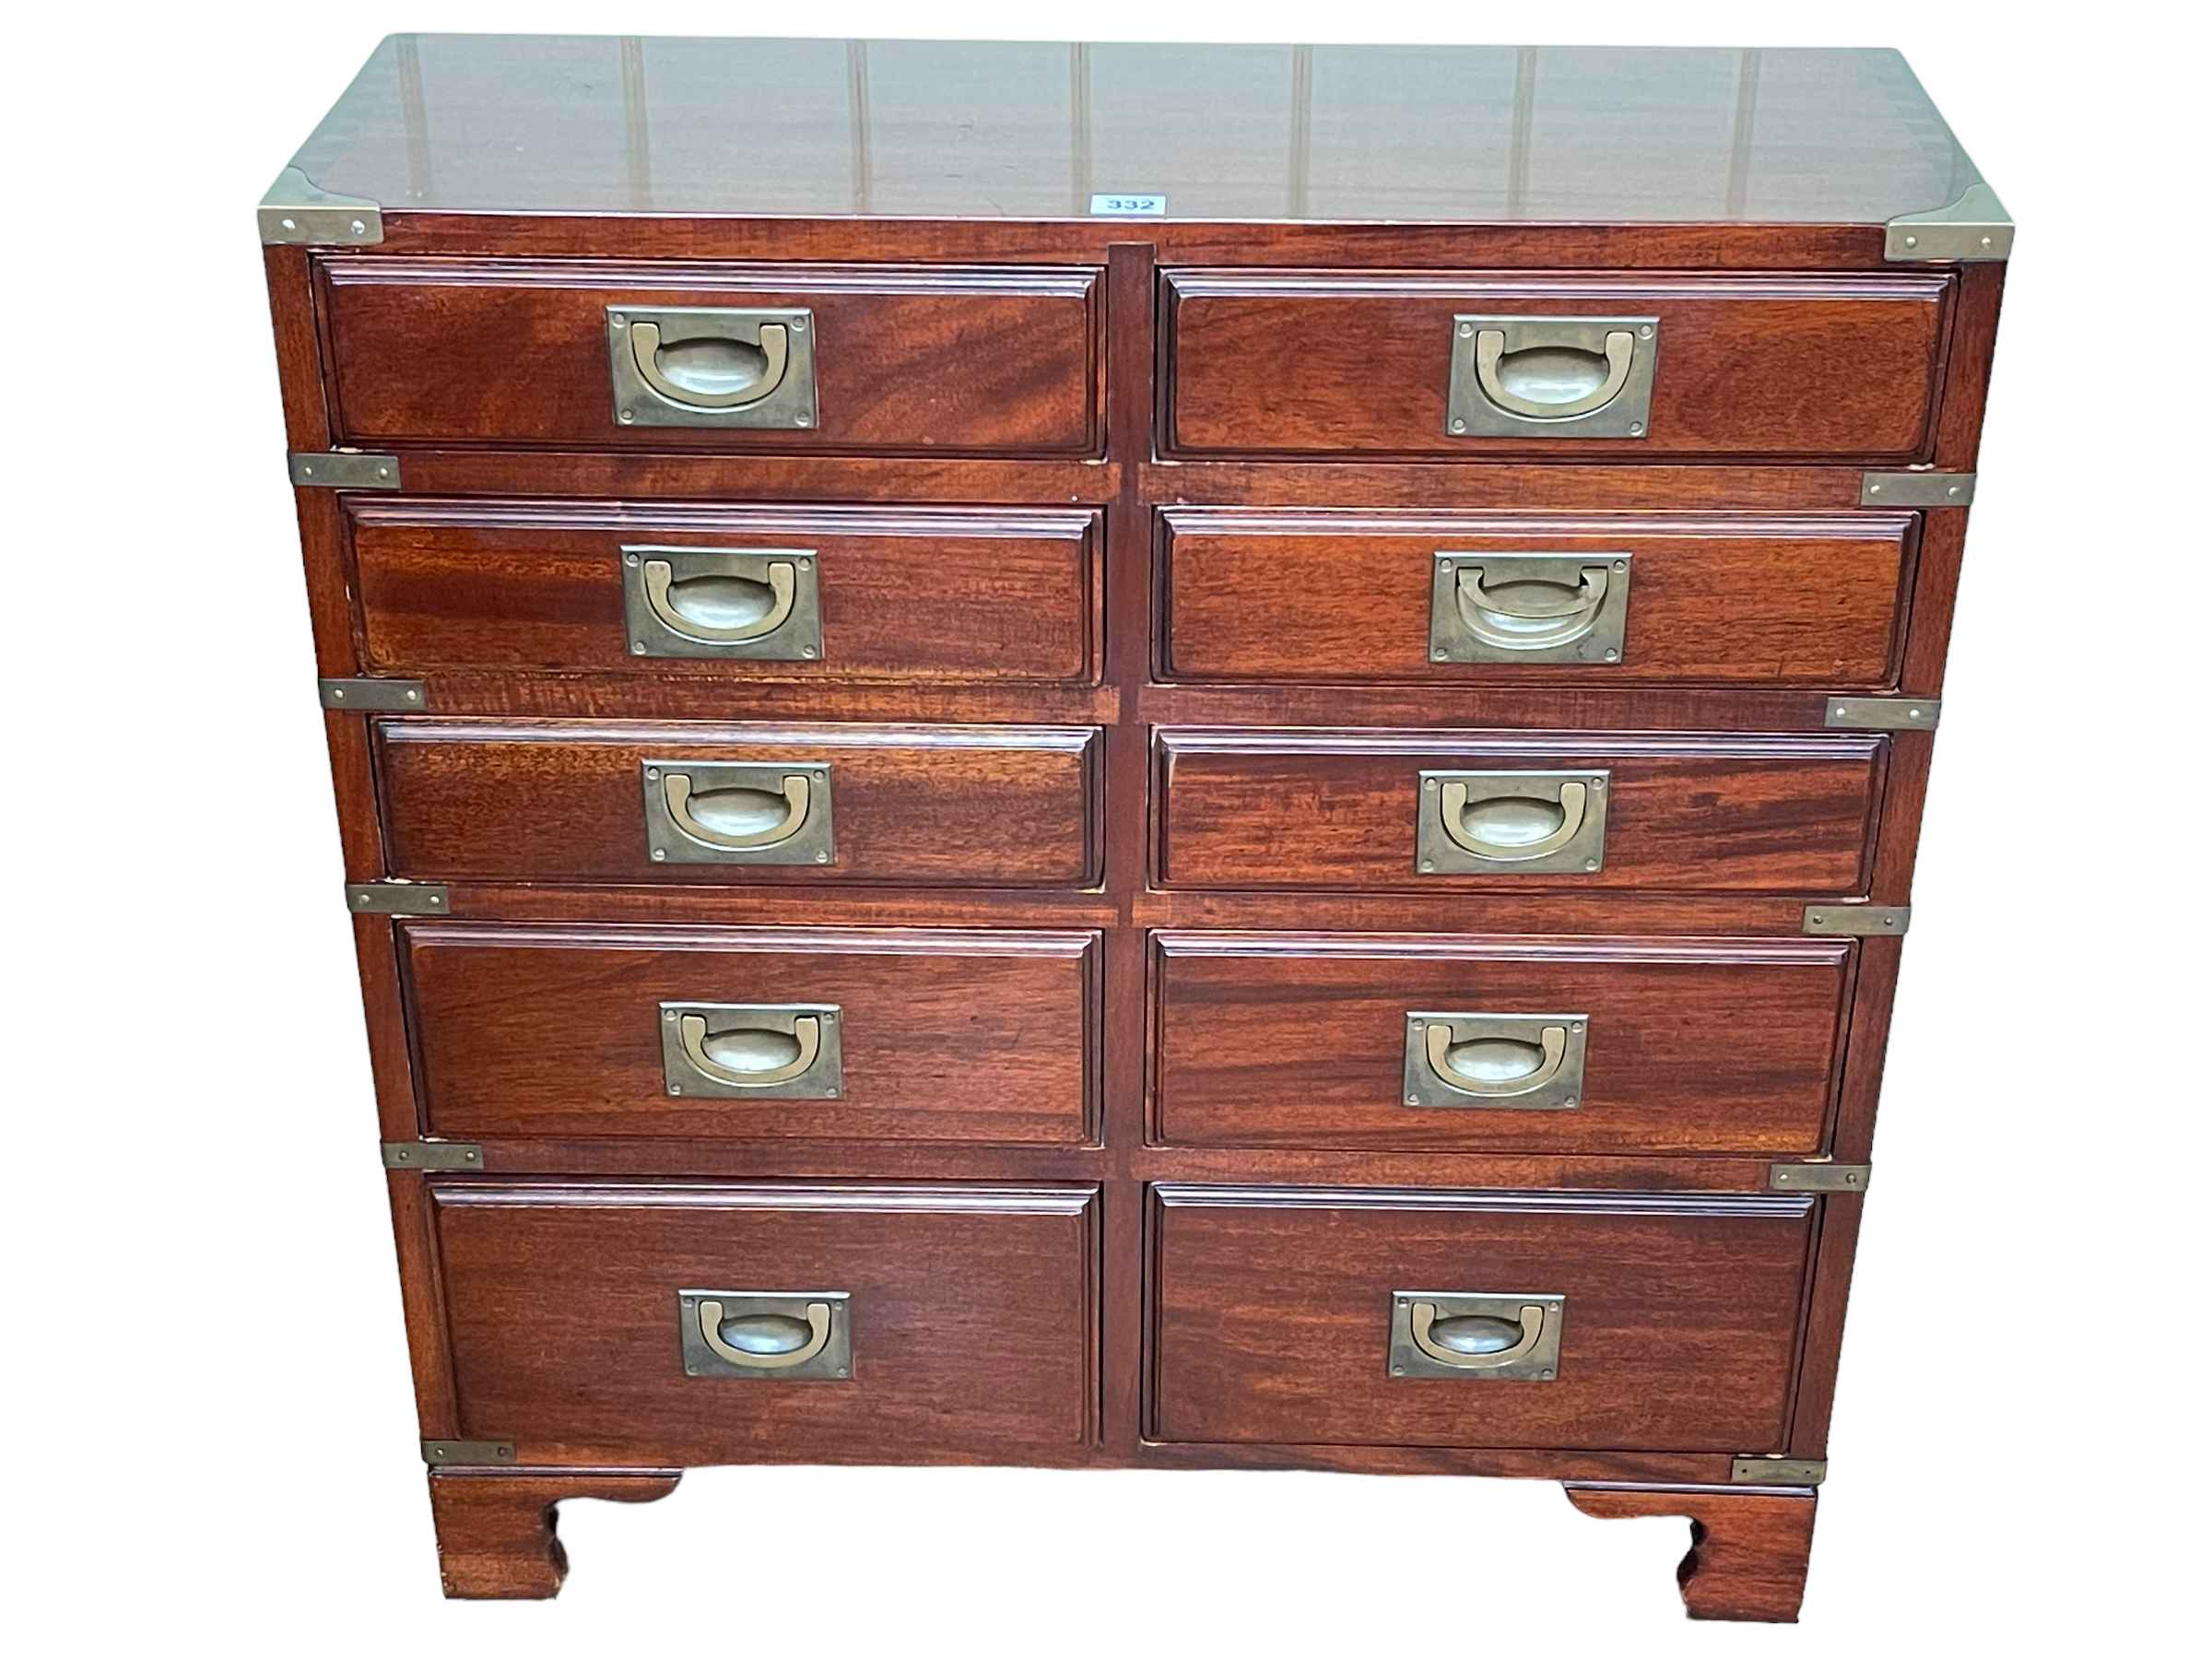 Mahogany campaign style eight drawer chest, 79cm by 74cm by 26cm.